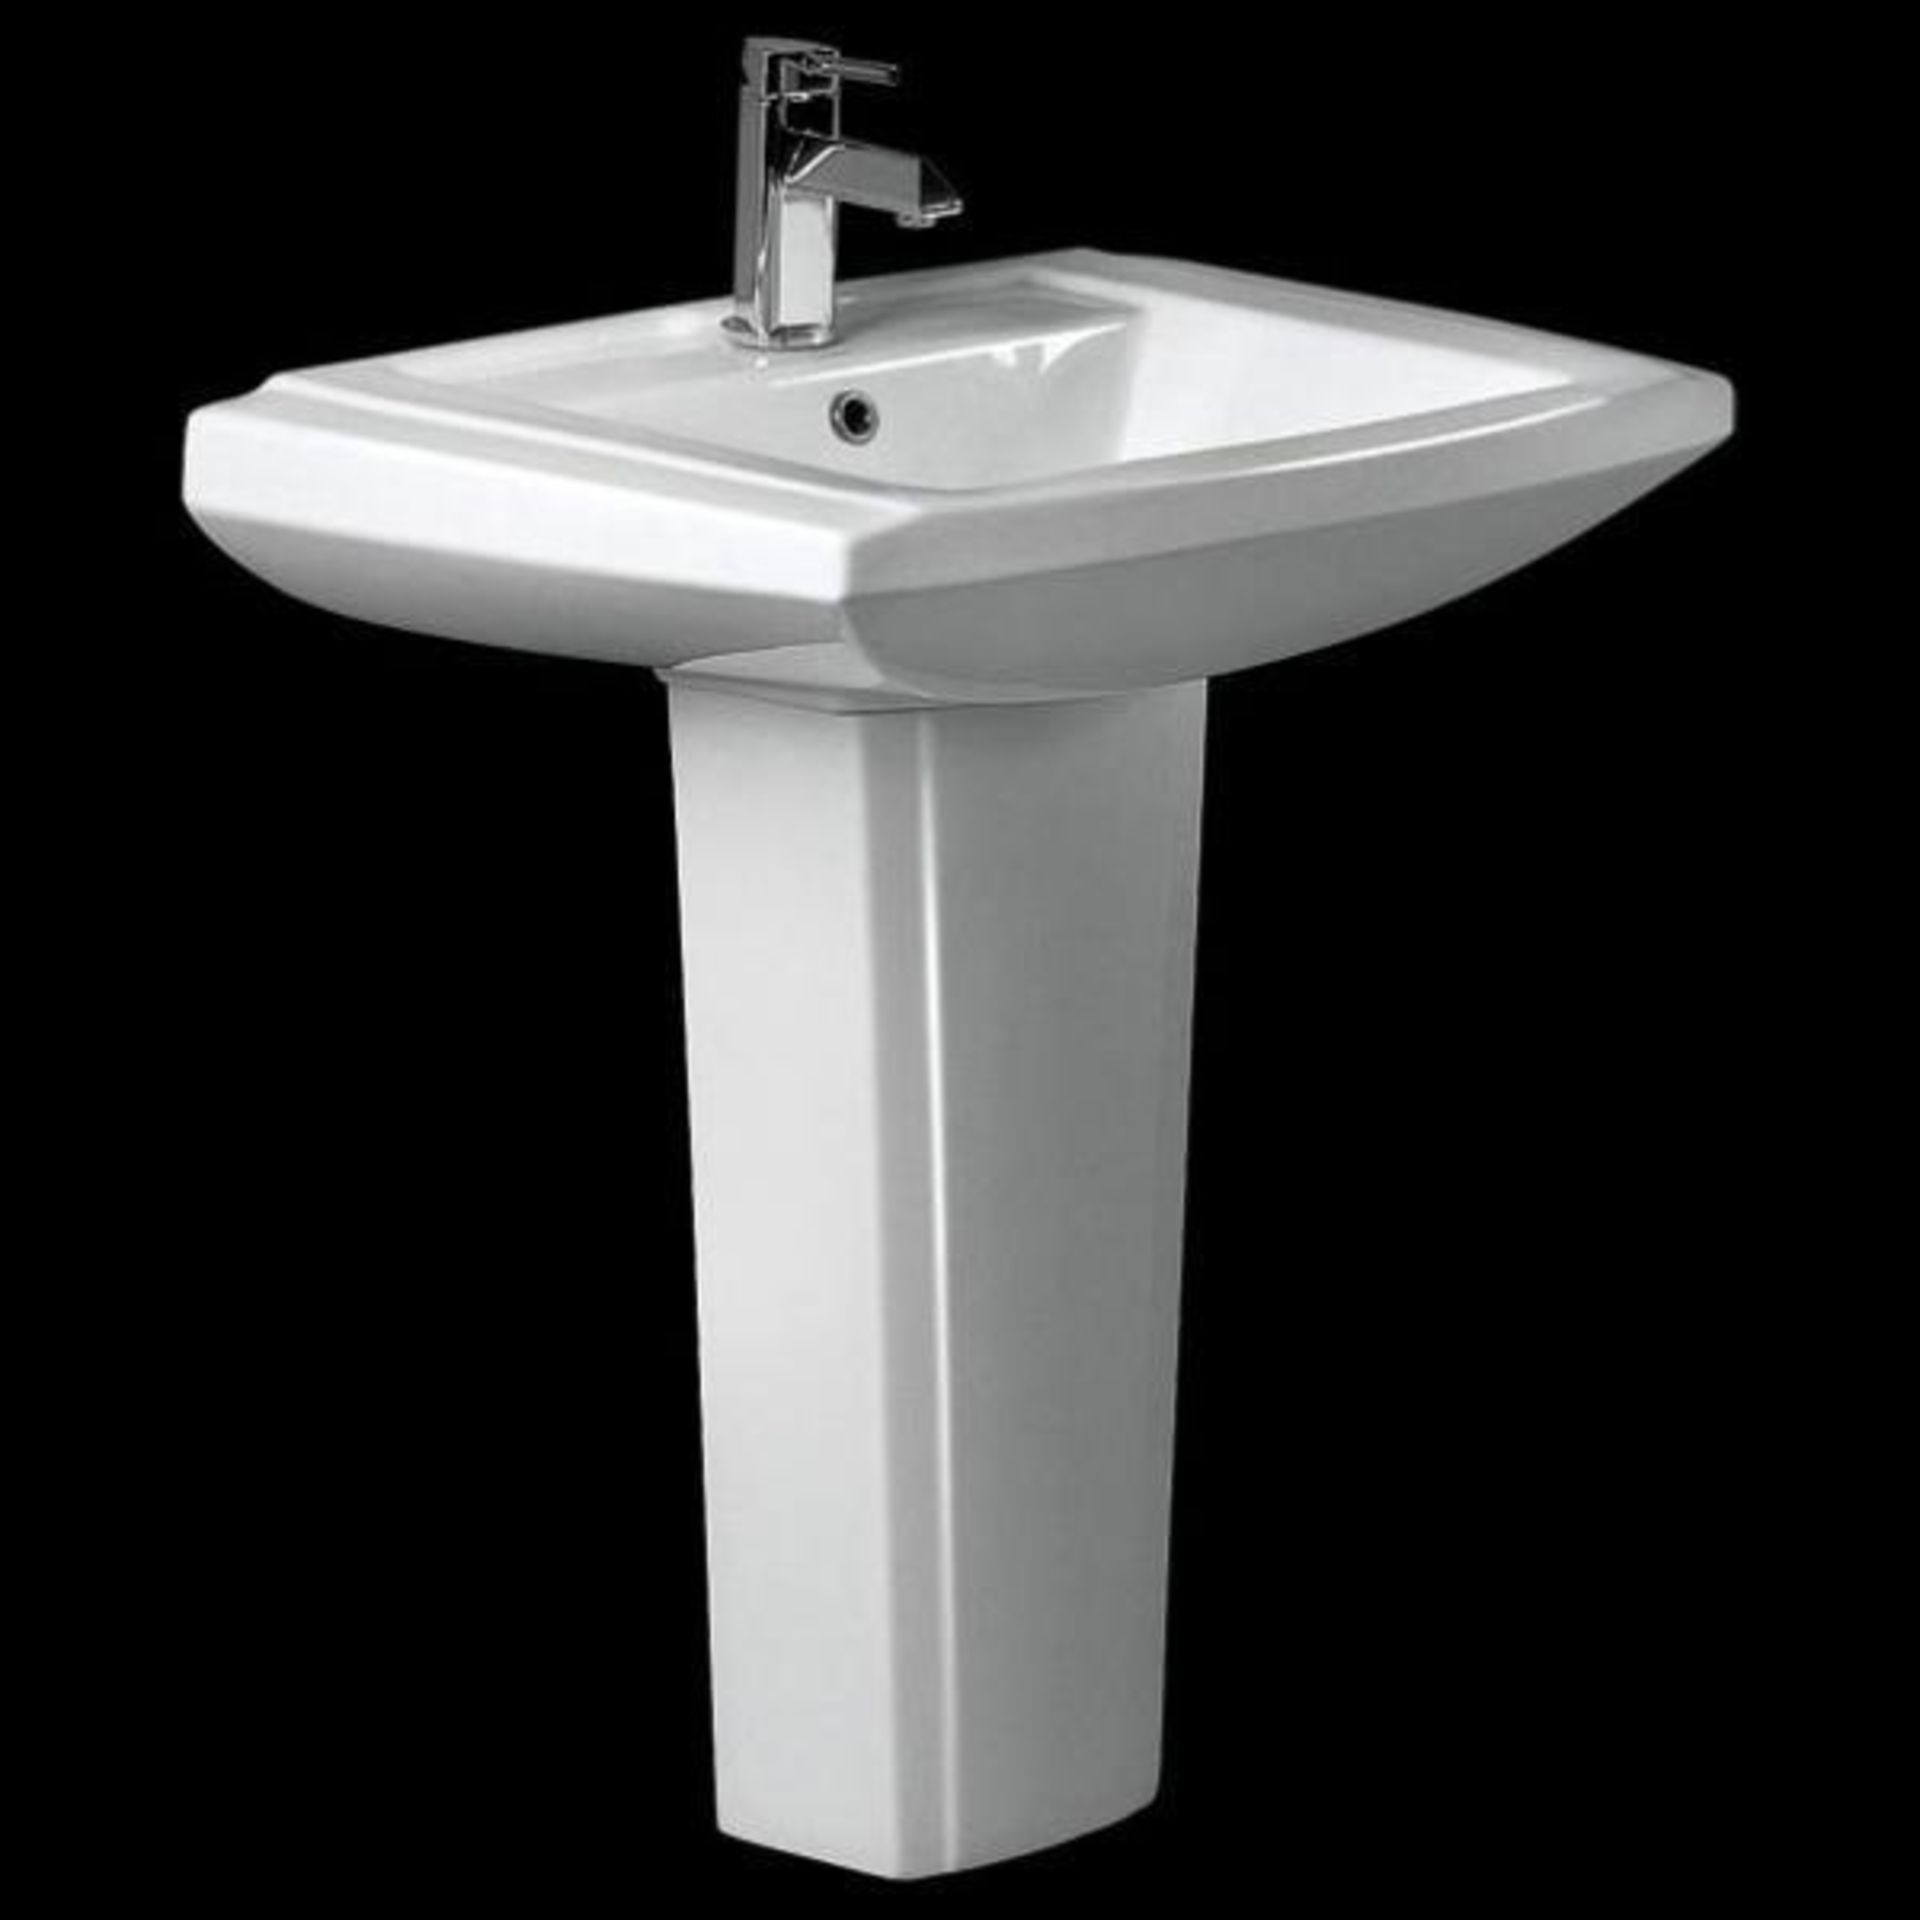 ADB 3 SB016 1pc high quality ceramic sink with pedal stool 710mm W x 520mm d x 845mm h new and boxed